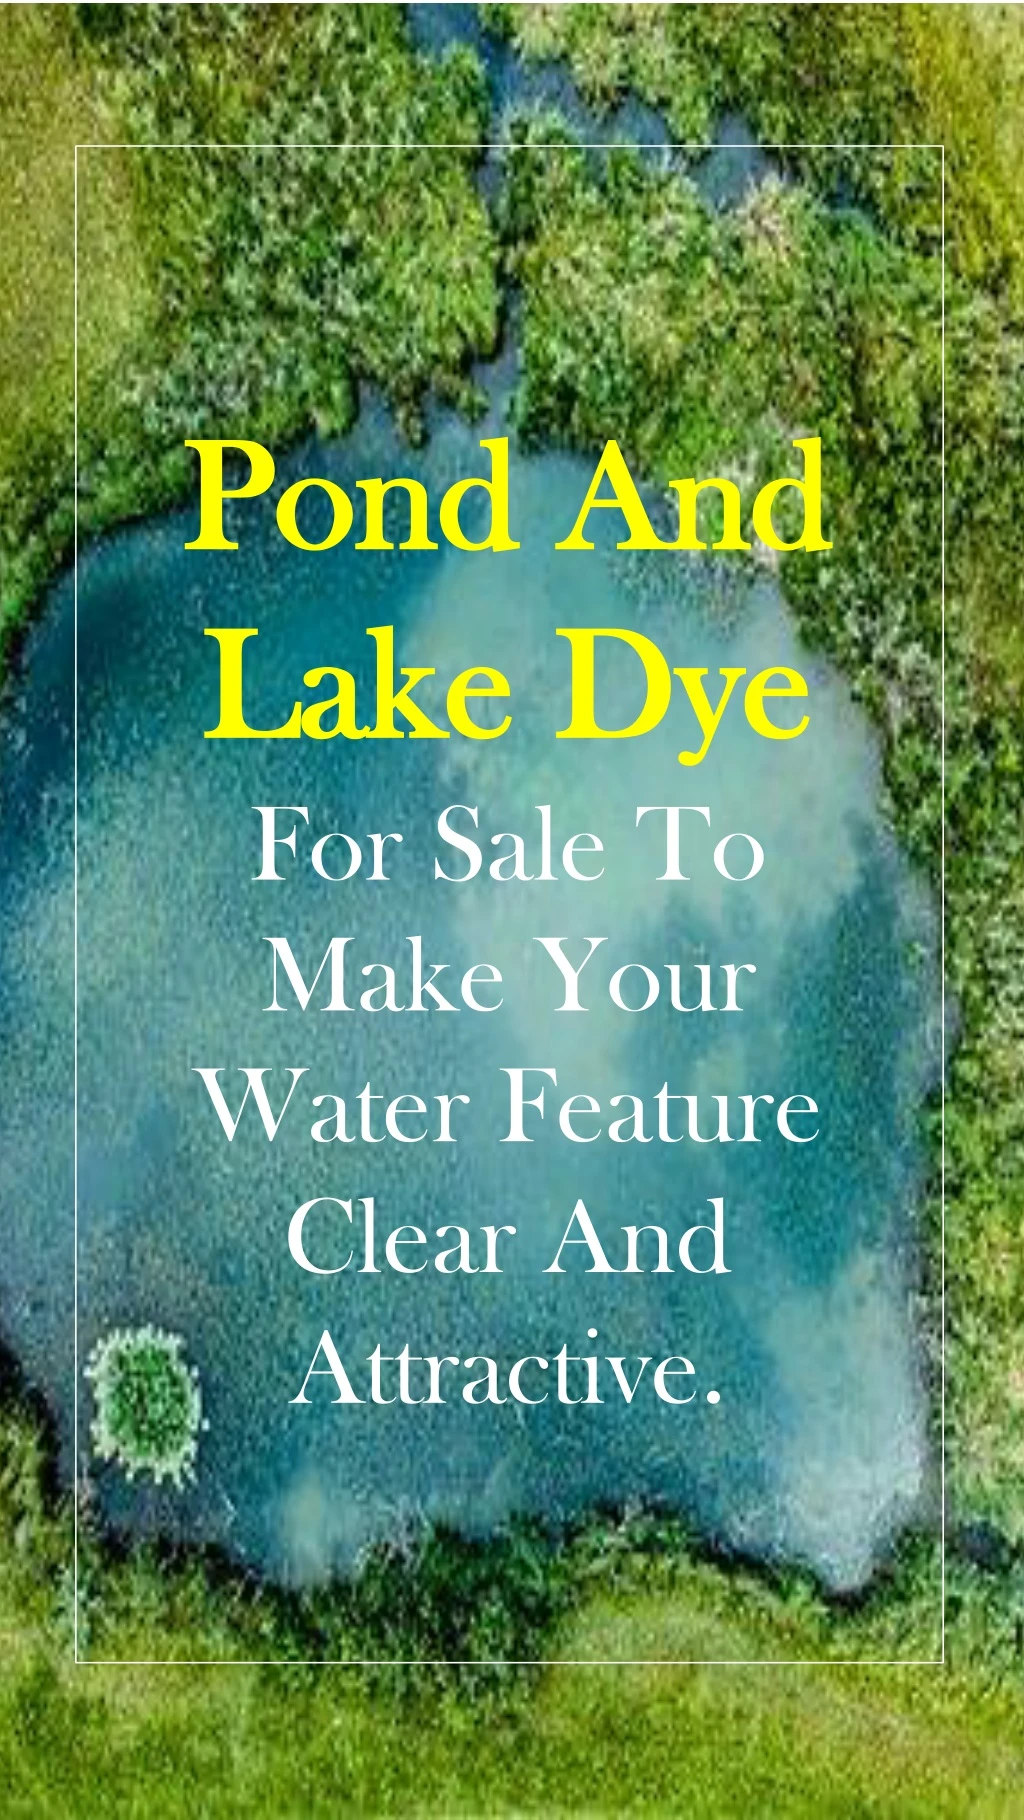 pond and lake dye for sale to make your water